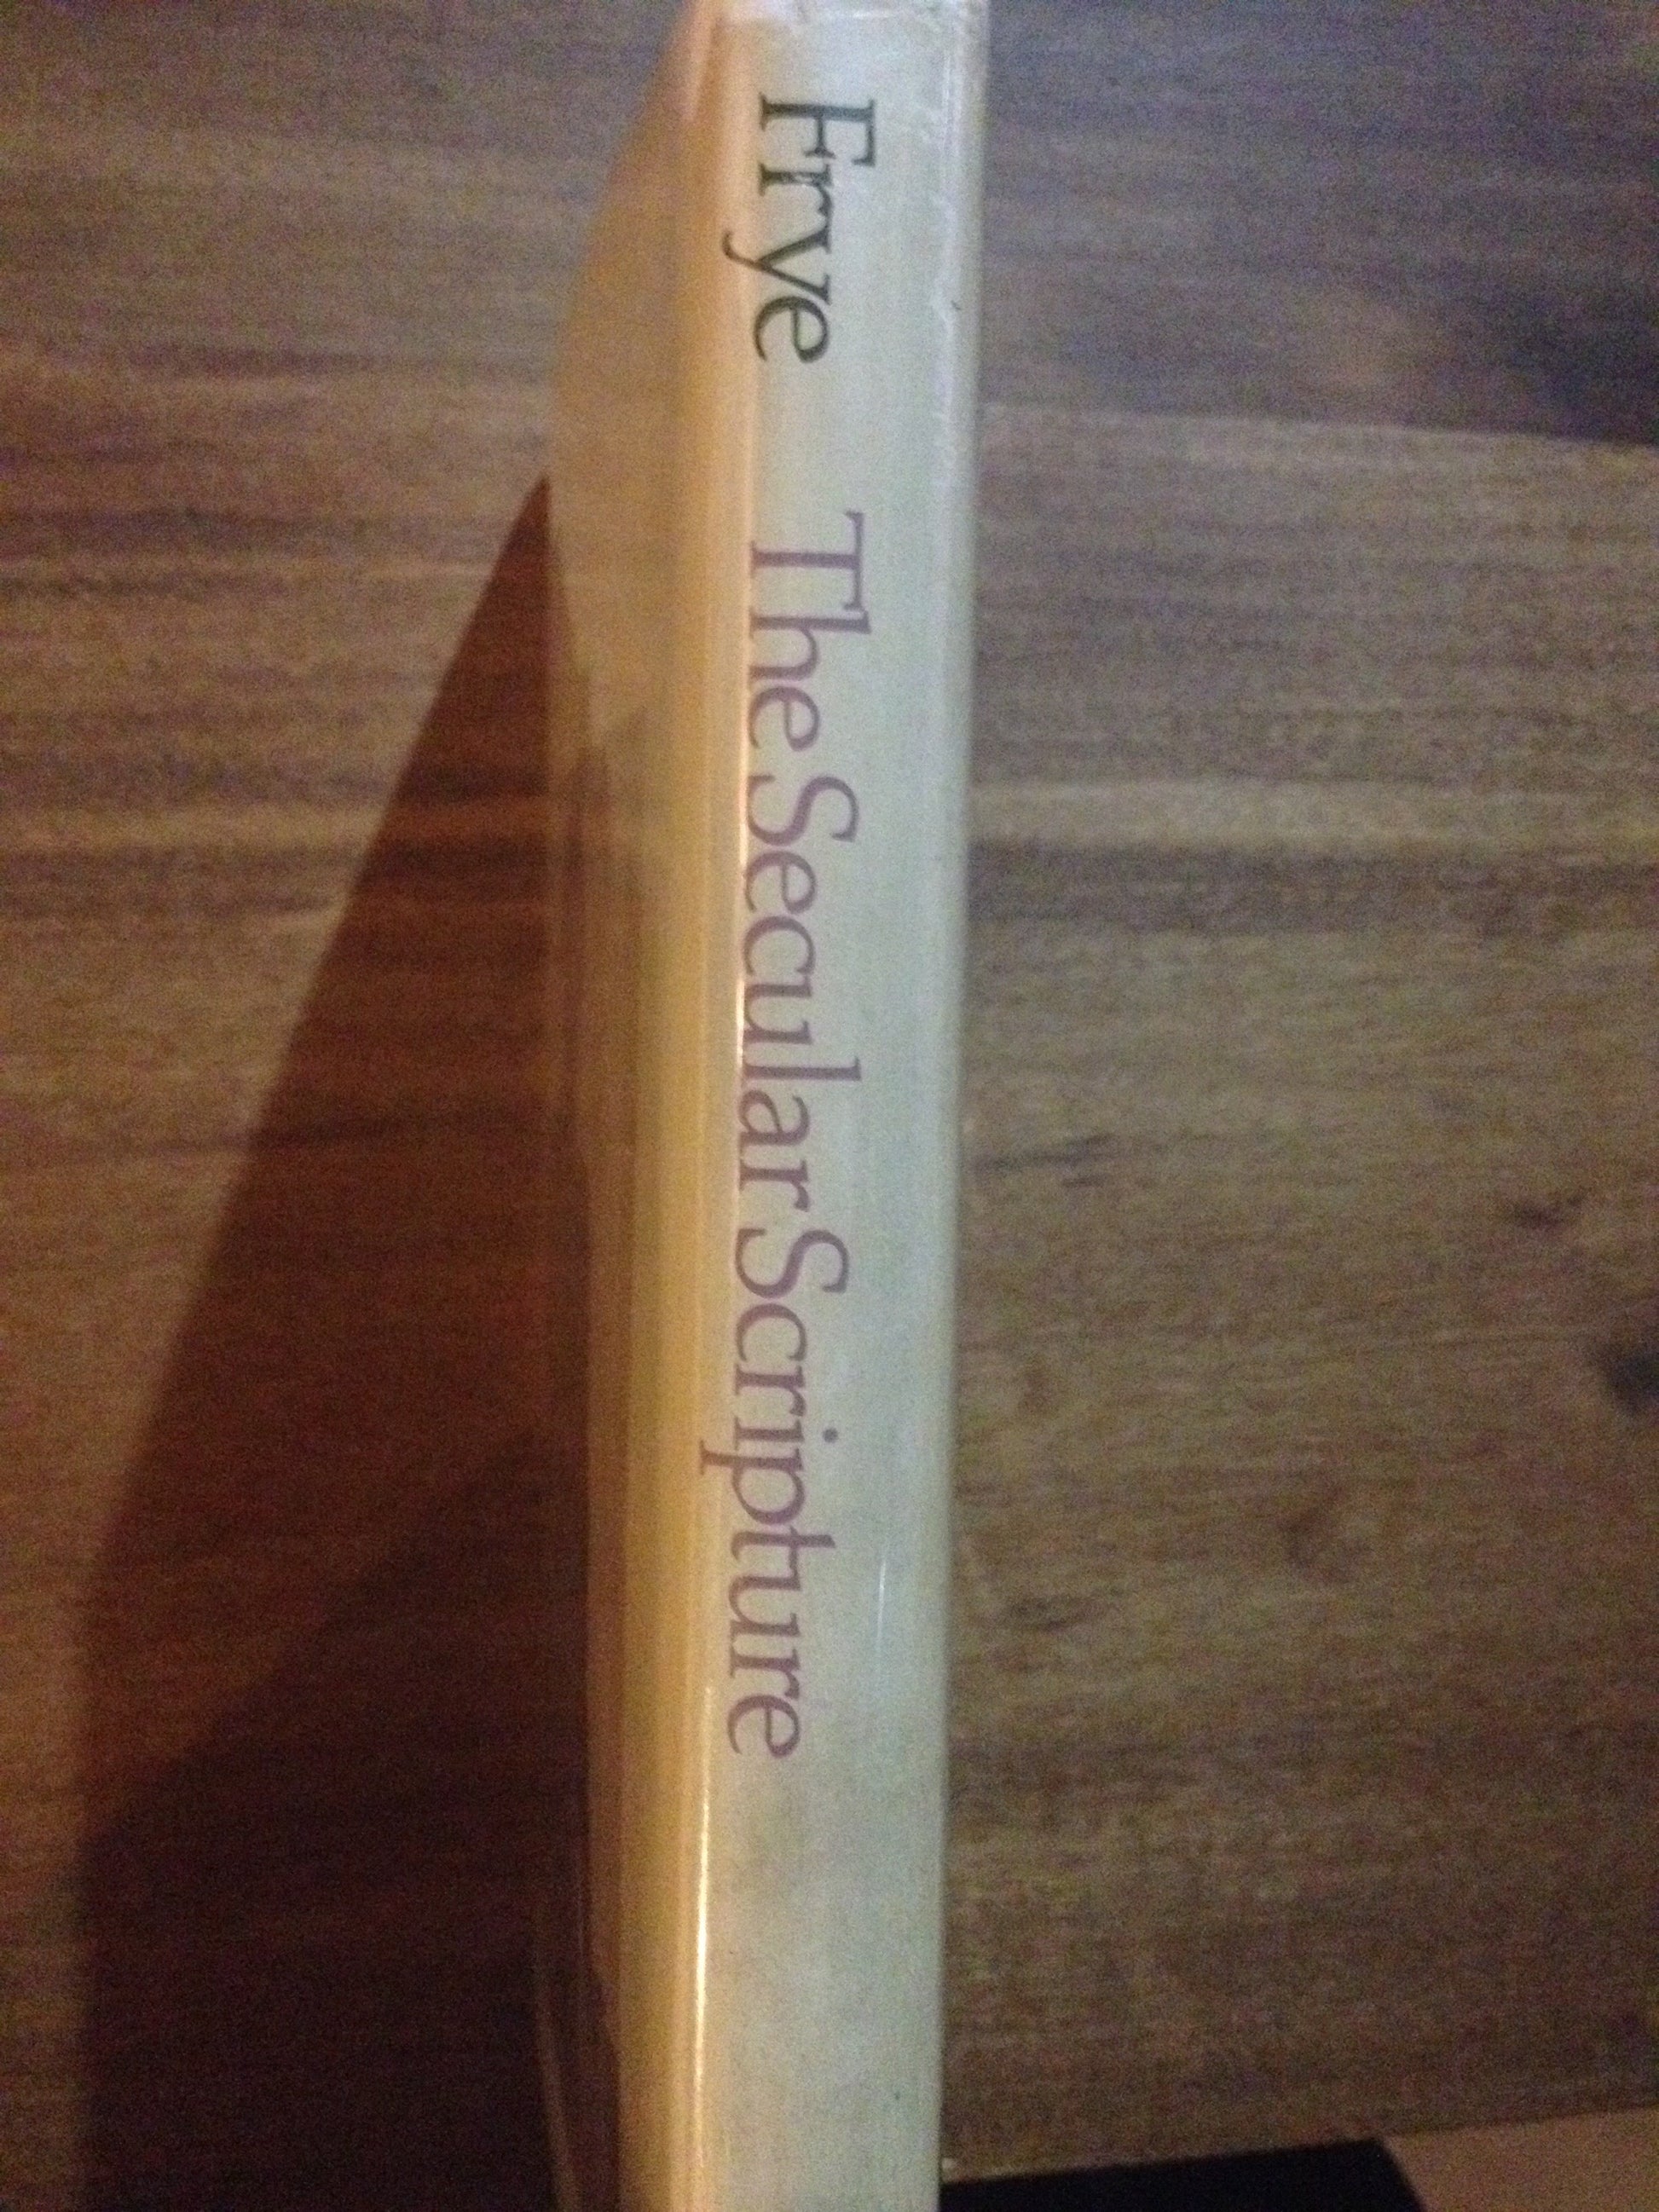 THE SECULAR SCRIPTURE - A STUDY OF ROMANCE BY: NORTHROP FRYE BooksCardsNBikes